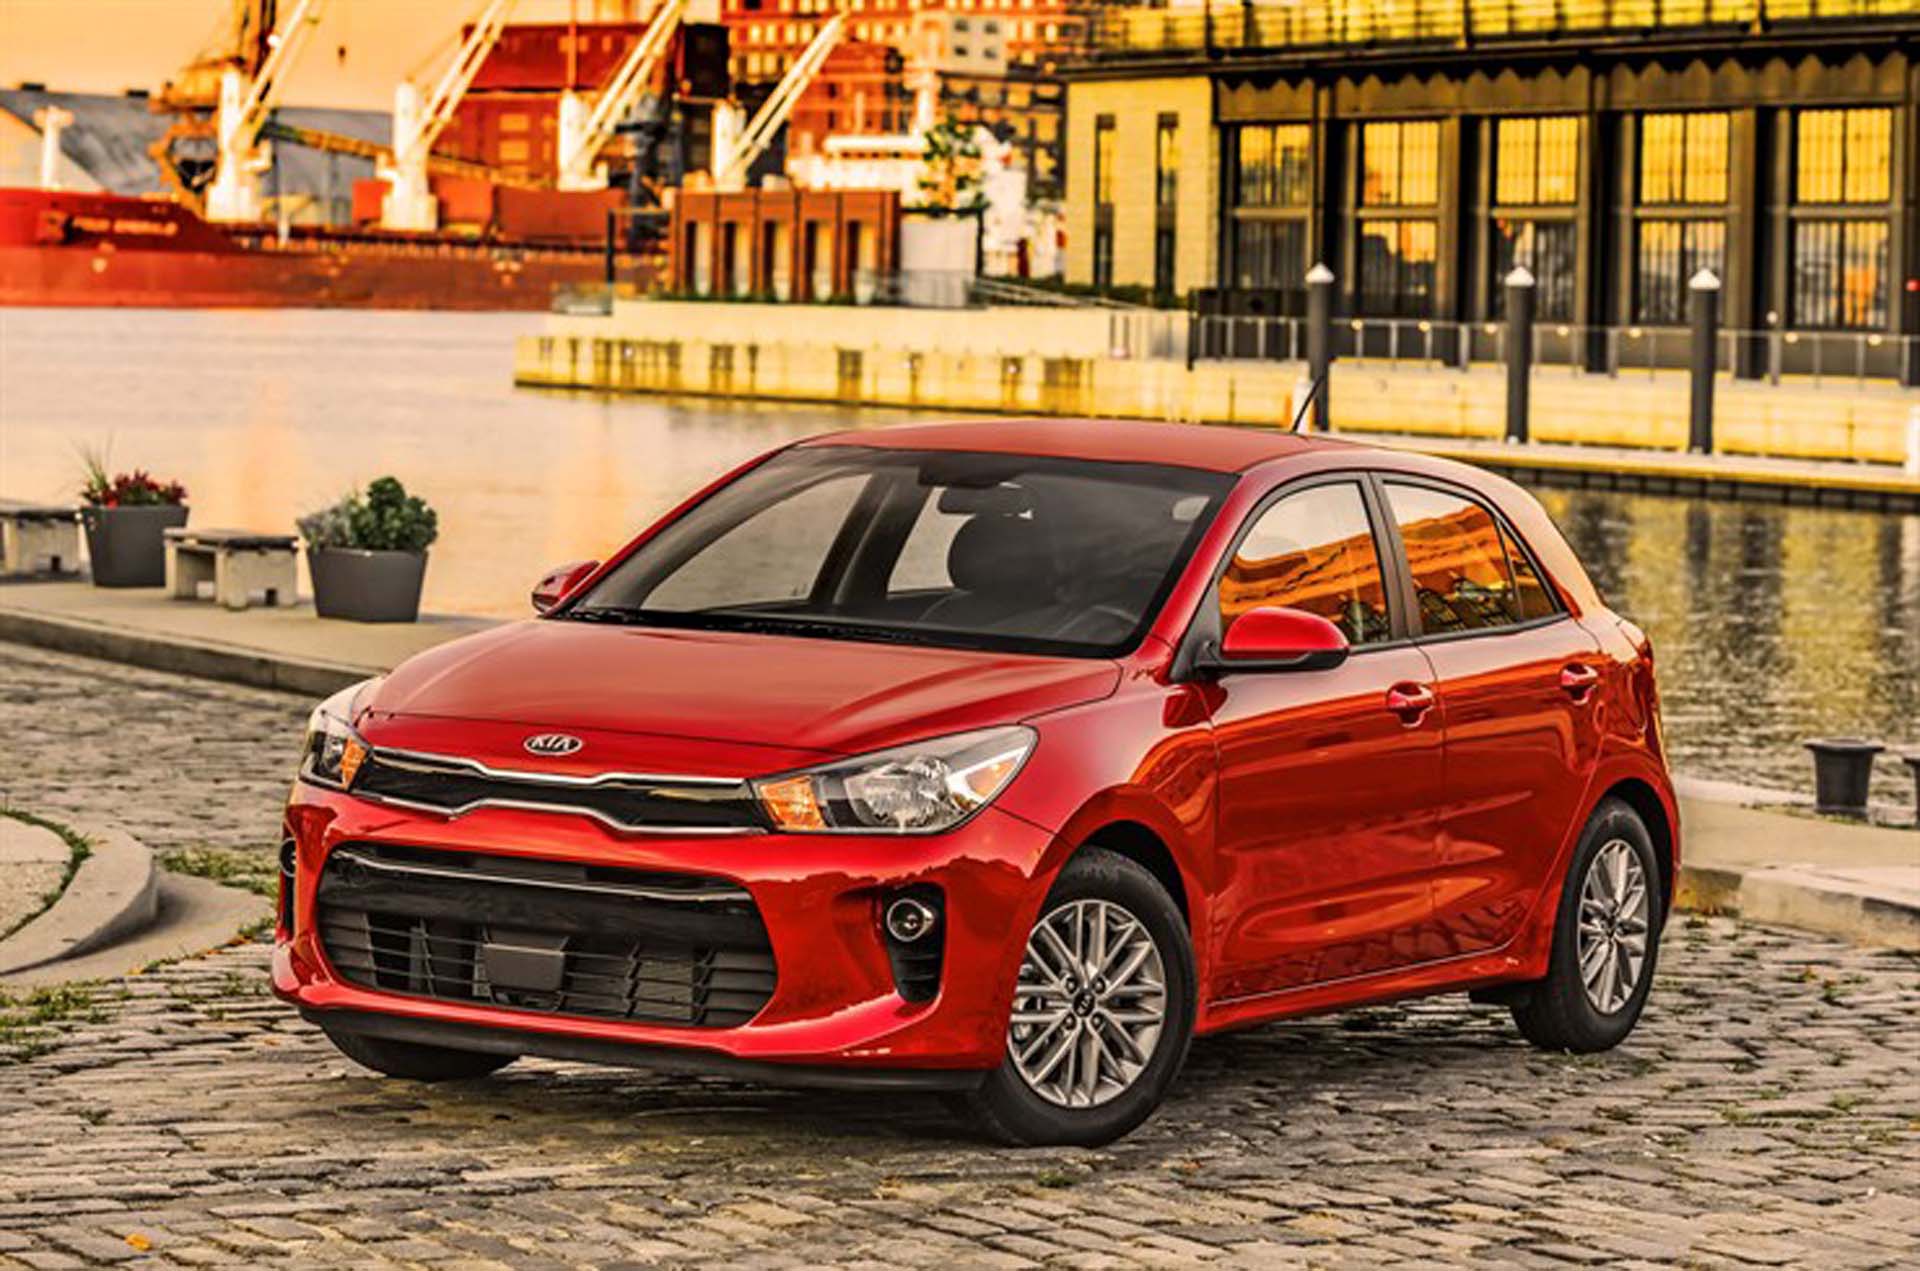 2018 Kia Rio Review, Ratings, Specs, Prices, and Photos - The Car Connection